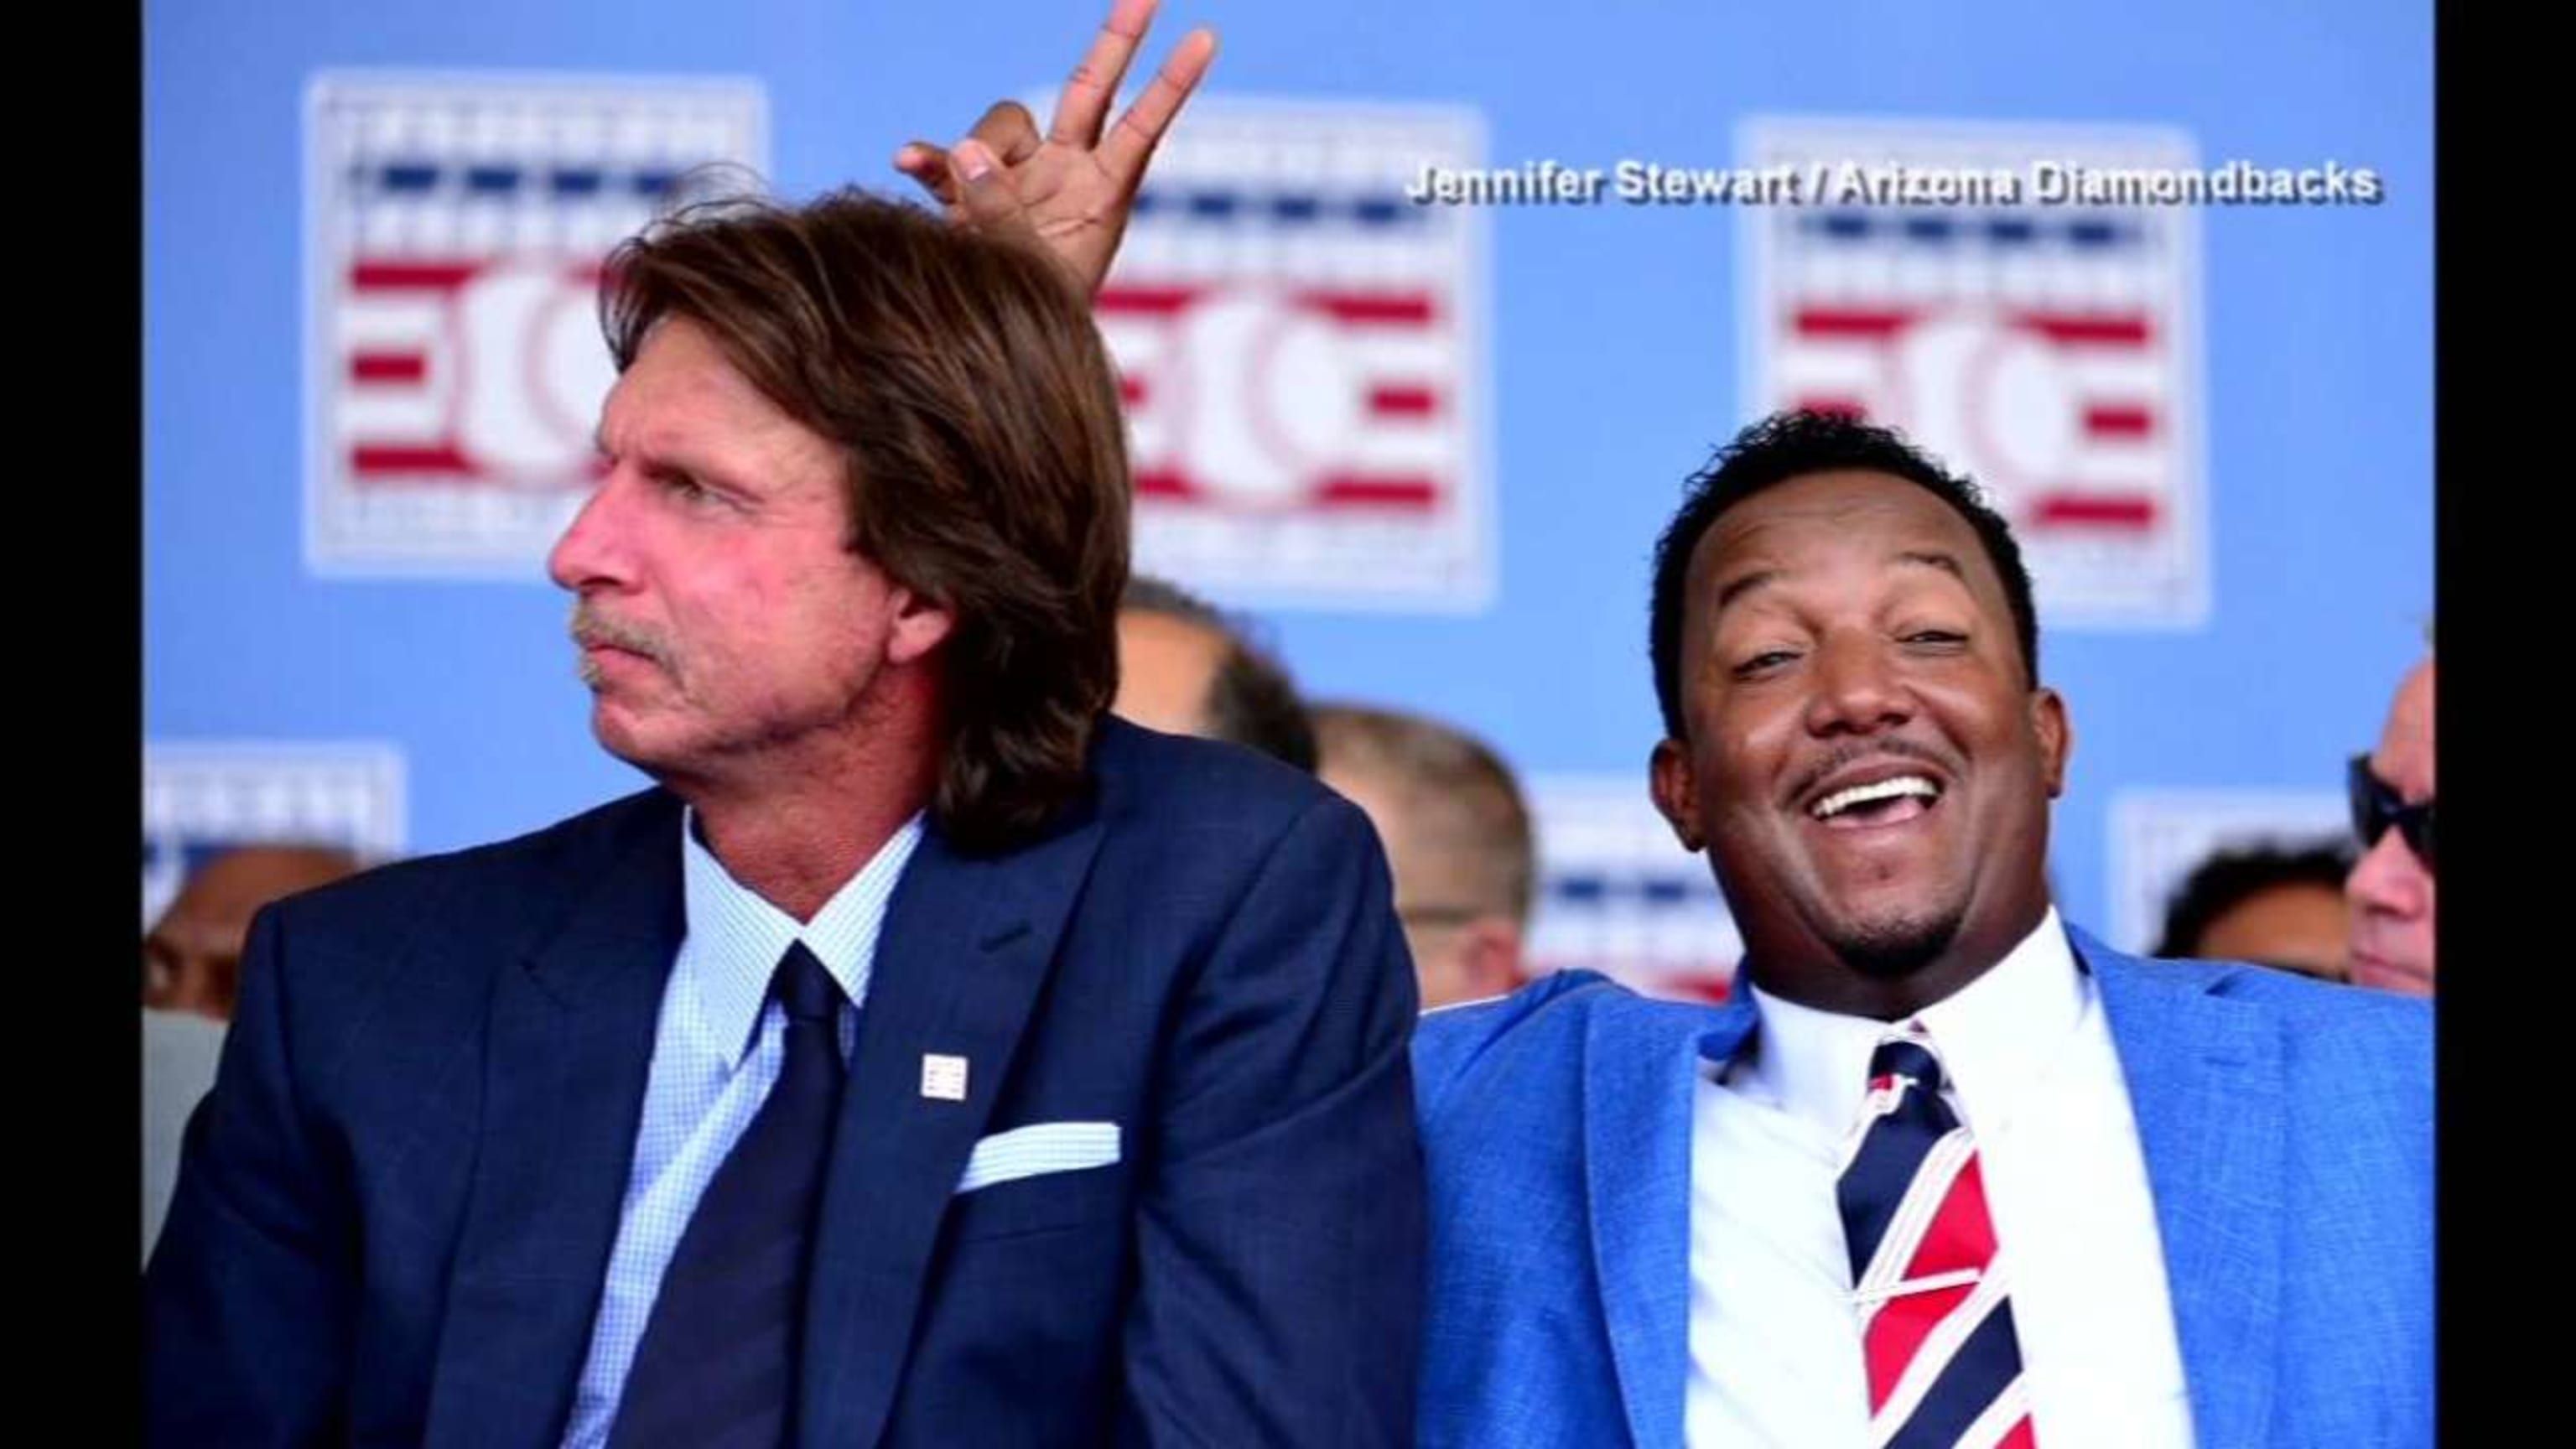 Though he'll enter Hall of Fame as a D-Back, Randy Johnson